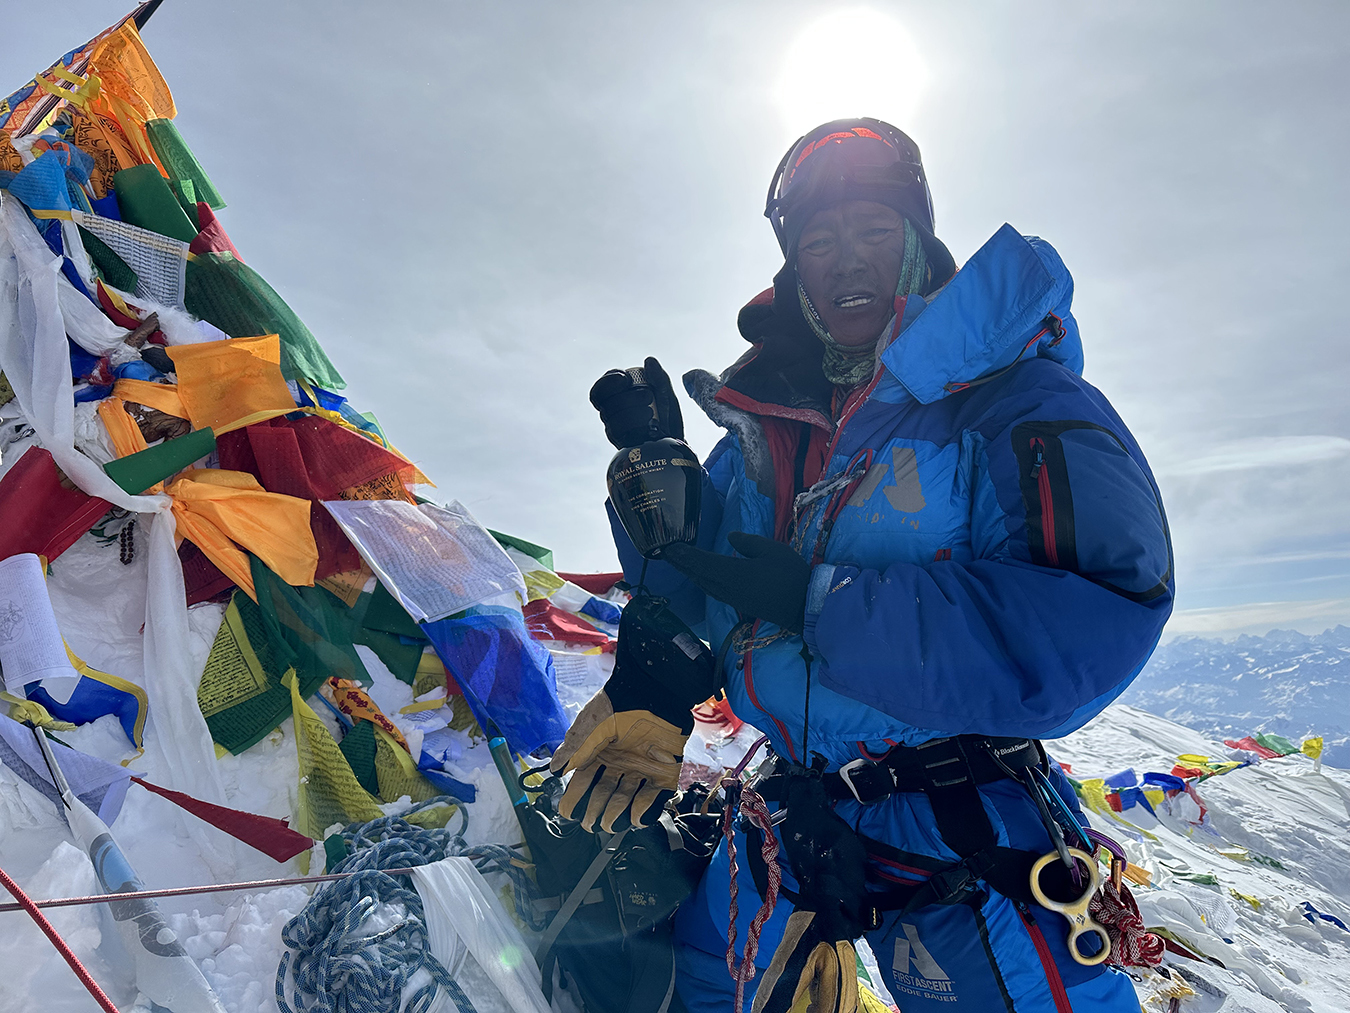 AC Guide Ang Dorjee Sherpa on the summit with the bottle of scotch he carried up there for charity in 2023.